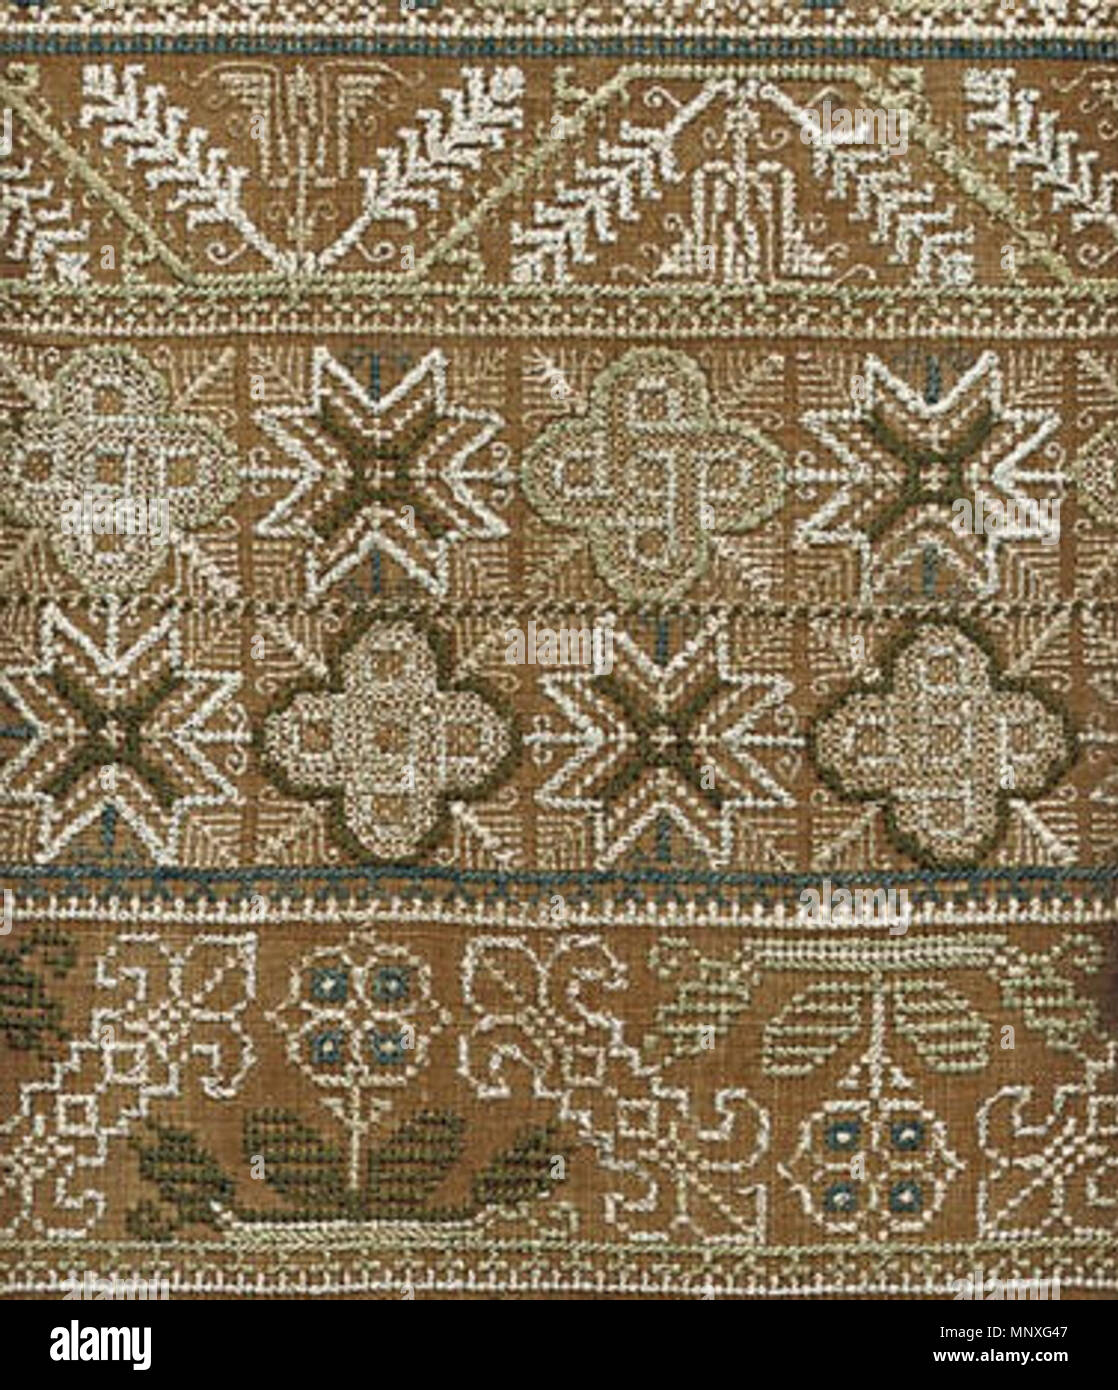 . Detail of needlework band sampler, c. 1660, buff coloured linen worked with an alphabet and endless knot details . circa 1660. signed 'E.S.' (unknown) 1147 Stuart band sampler detail Stock Photo